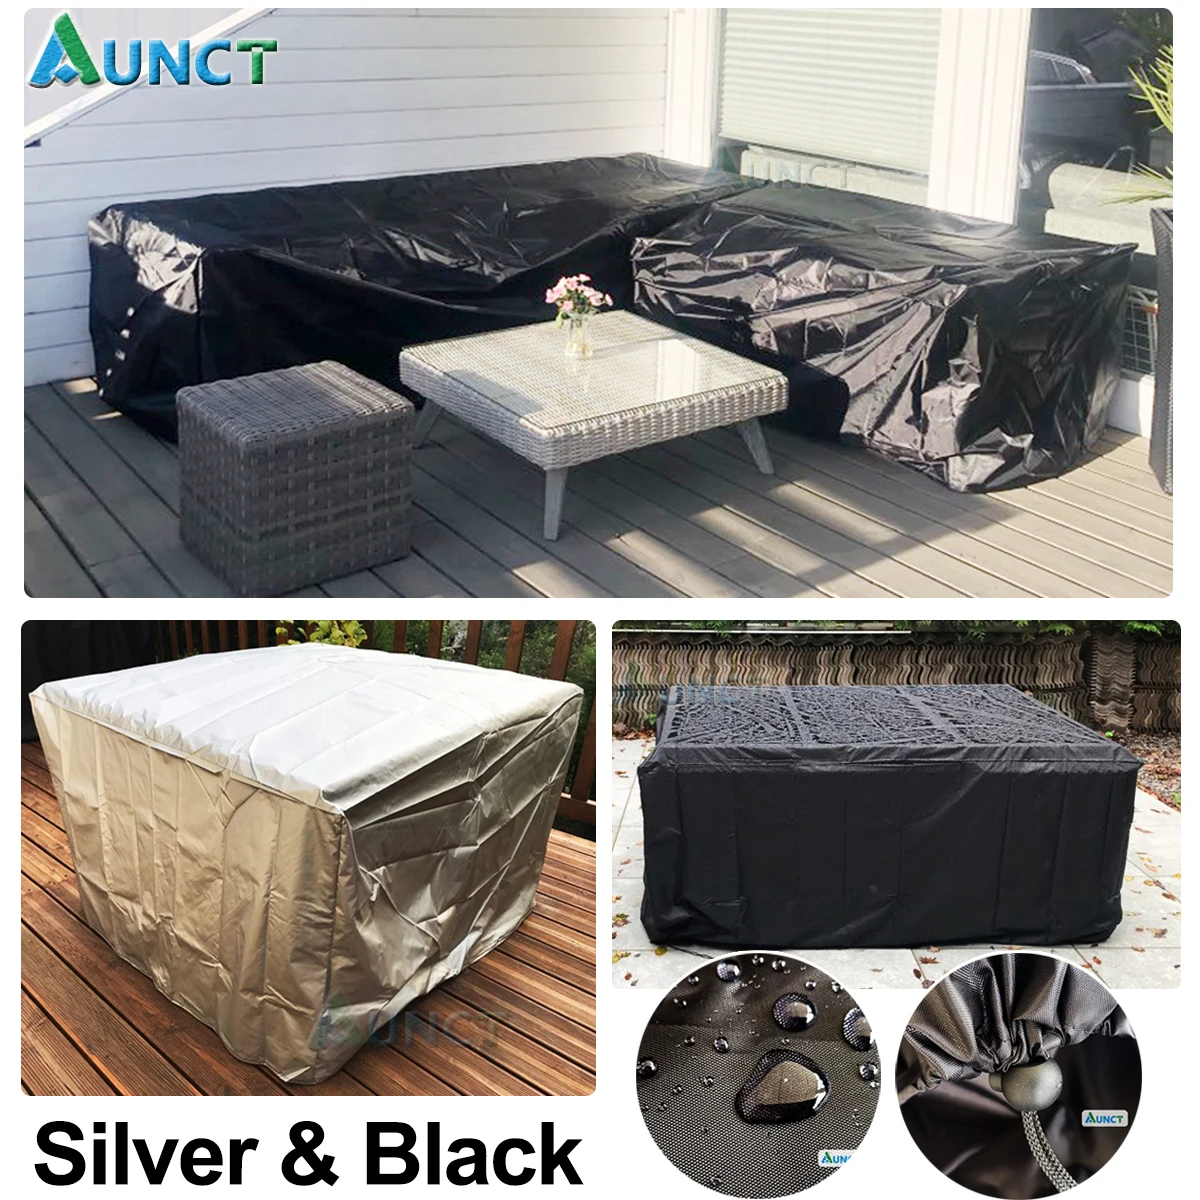 Furniture Cover Waterproof Outdoor Garden Patio Beach Sofa Chair Table Covers Protection Rain Snow Dustproof Storage Cover